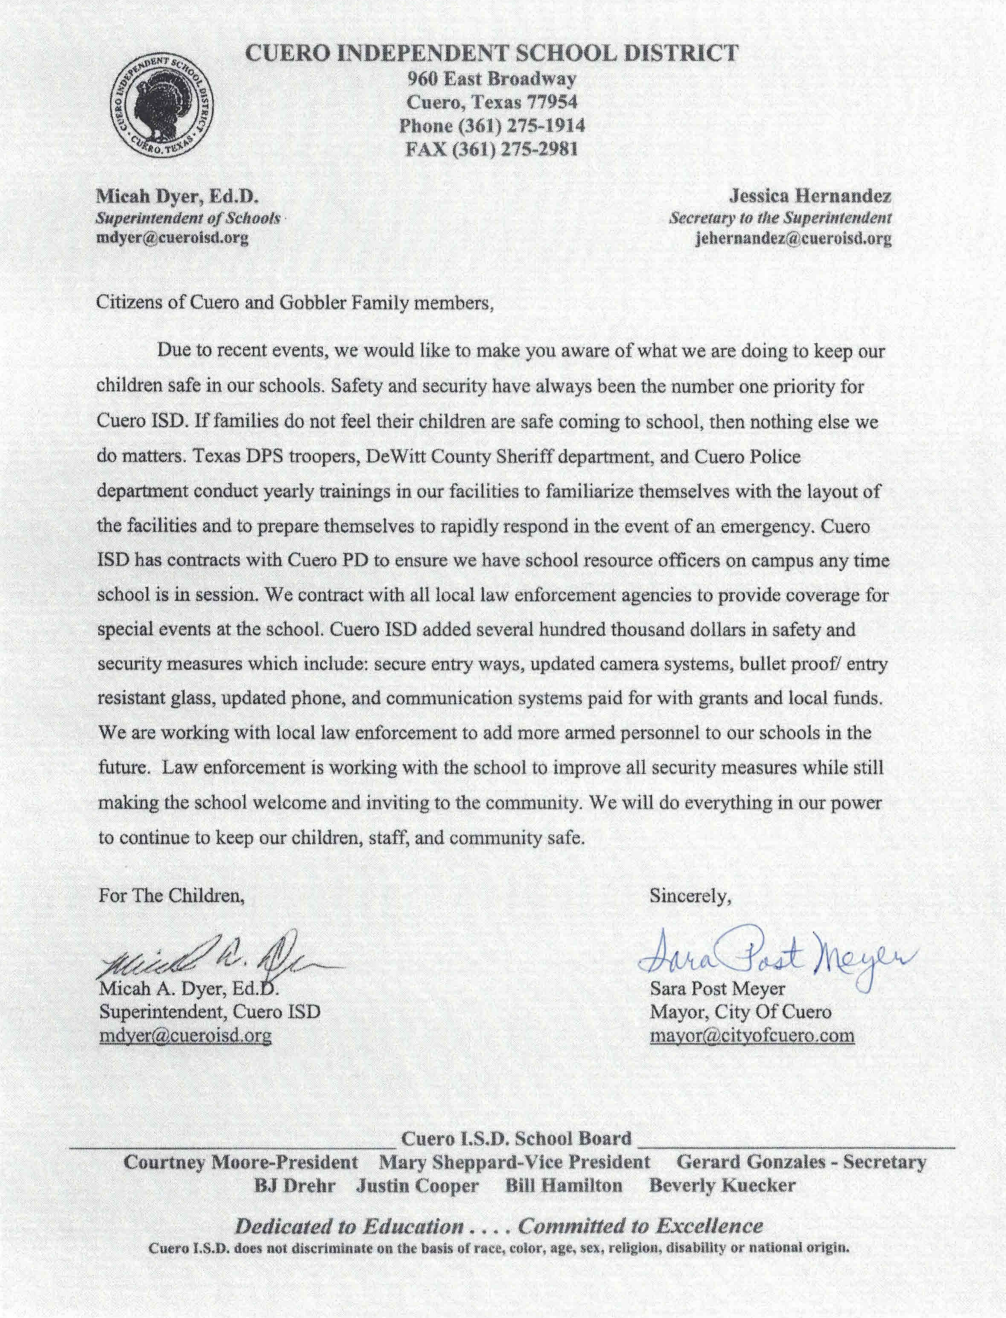 Click here to read the PDF of the letter from Micah Dyer and Sara Post Meyer